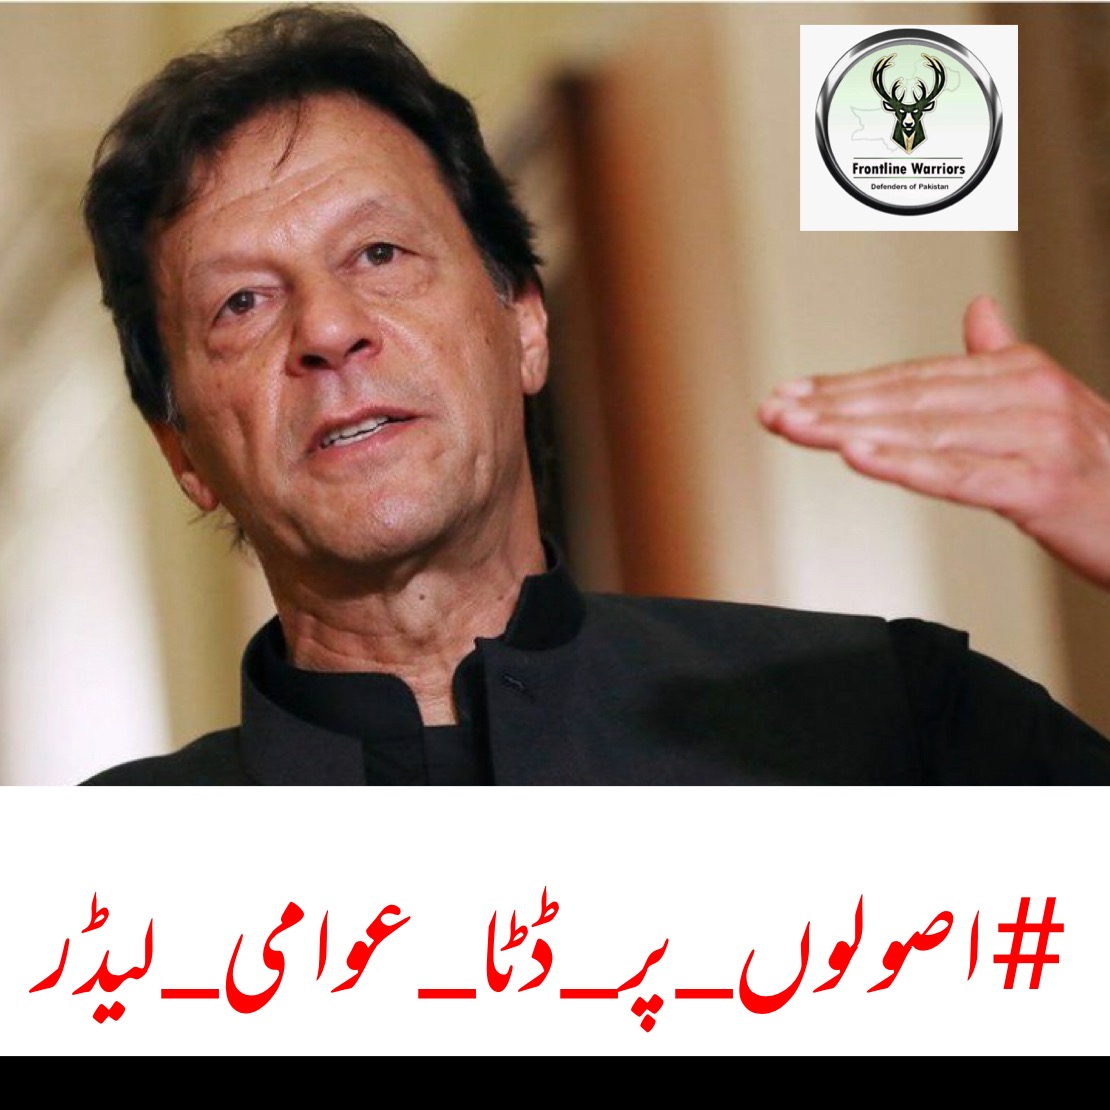 IK is the only leader who sacrificed his power, went to jail unjustly. Whose worst character was maligned, worst personal attacks were made on himself, his wife, but despite all this he did not compromise on his principles, stood firm on his principles. #اصولوں_پر_ڈٹا_عوامی_لیڈر